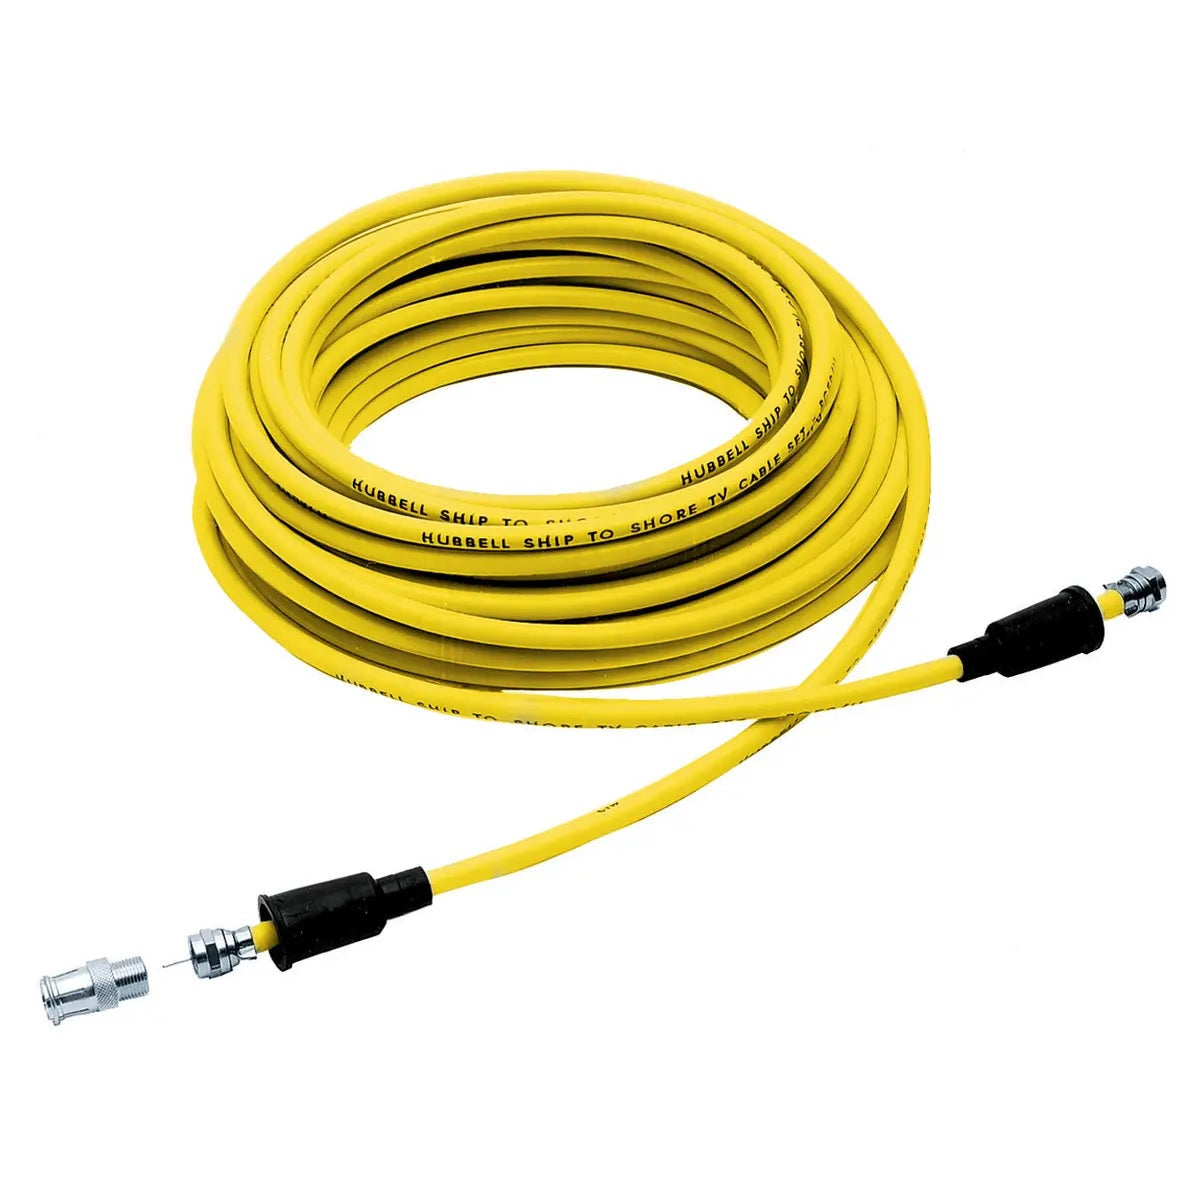 Hubbell HUBTV99 50' TV Cord